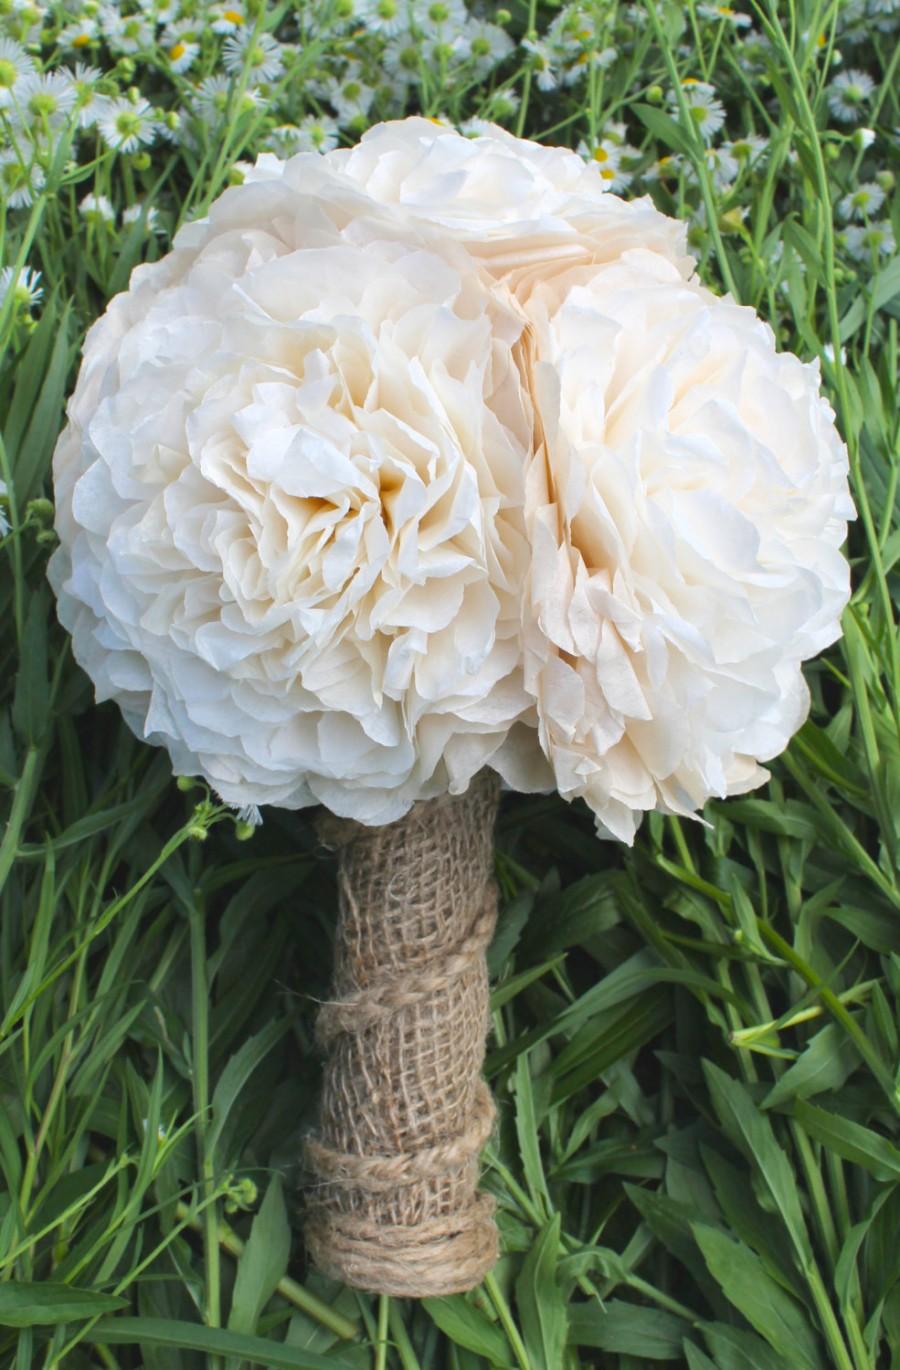 Wedding - Ivory/Cream Burlap and Twine Bouquet - Country Rustic Wedding - Summer - Spring - Autumn